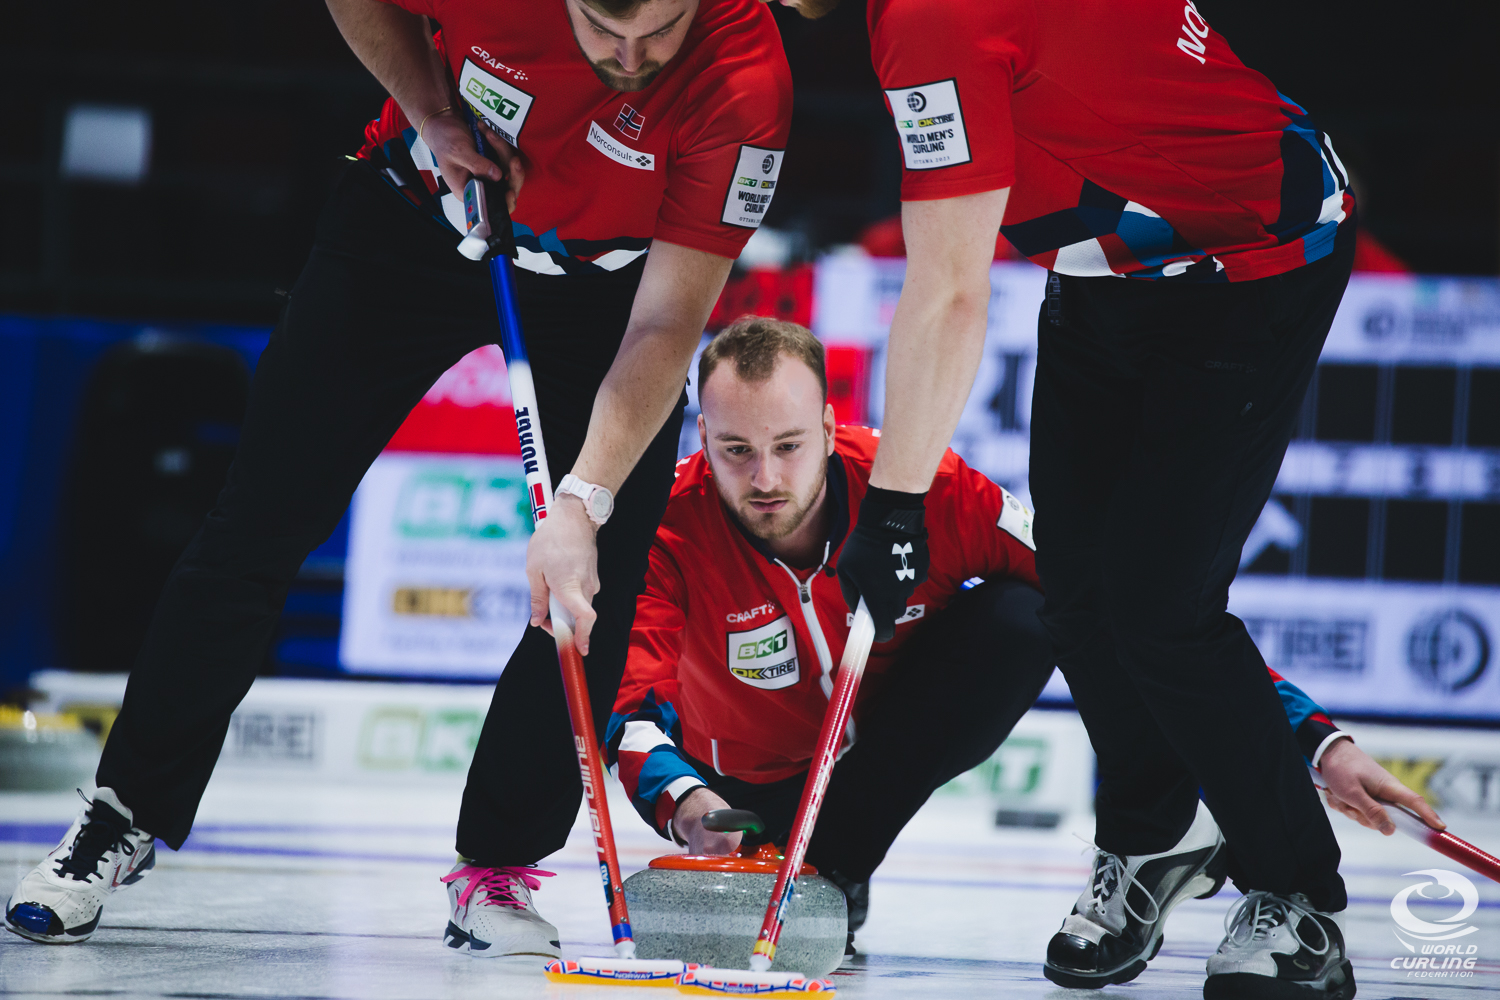 CurlingZone Edin suffers first loss; Gushue improves to 5-2 at mens worlds